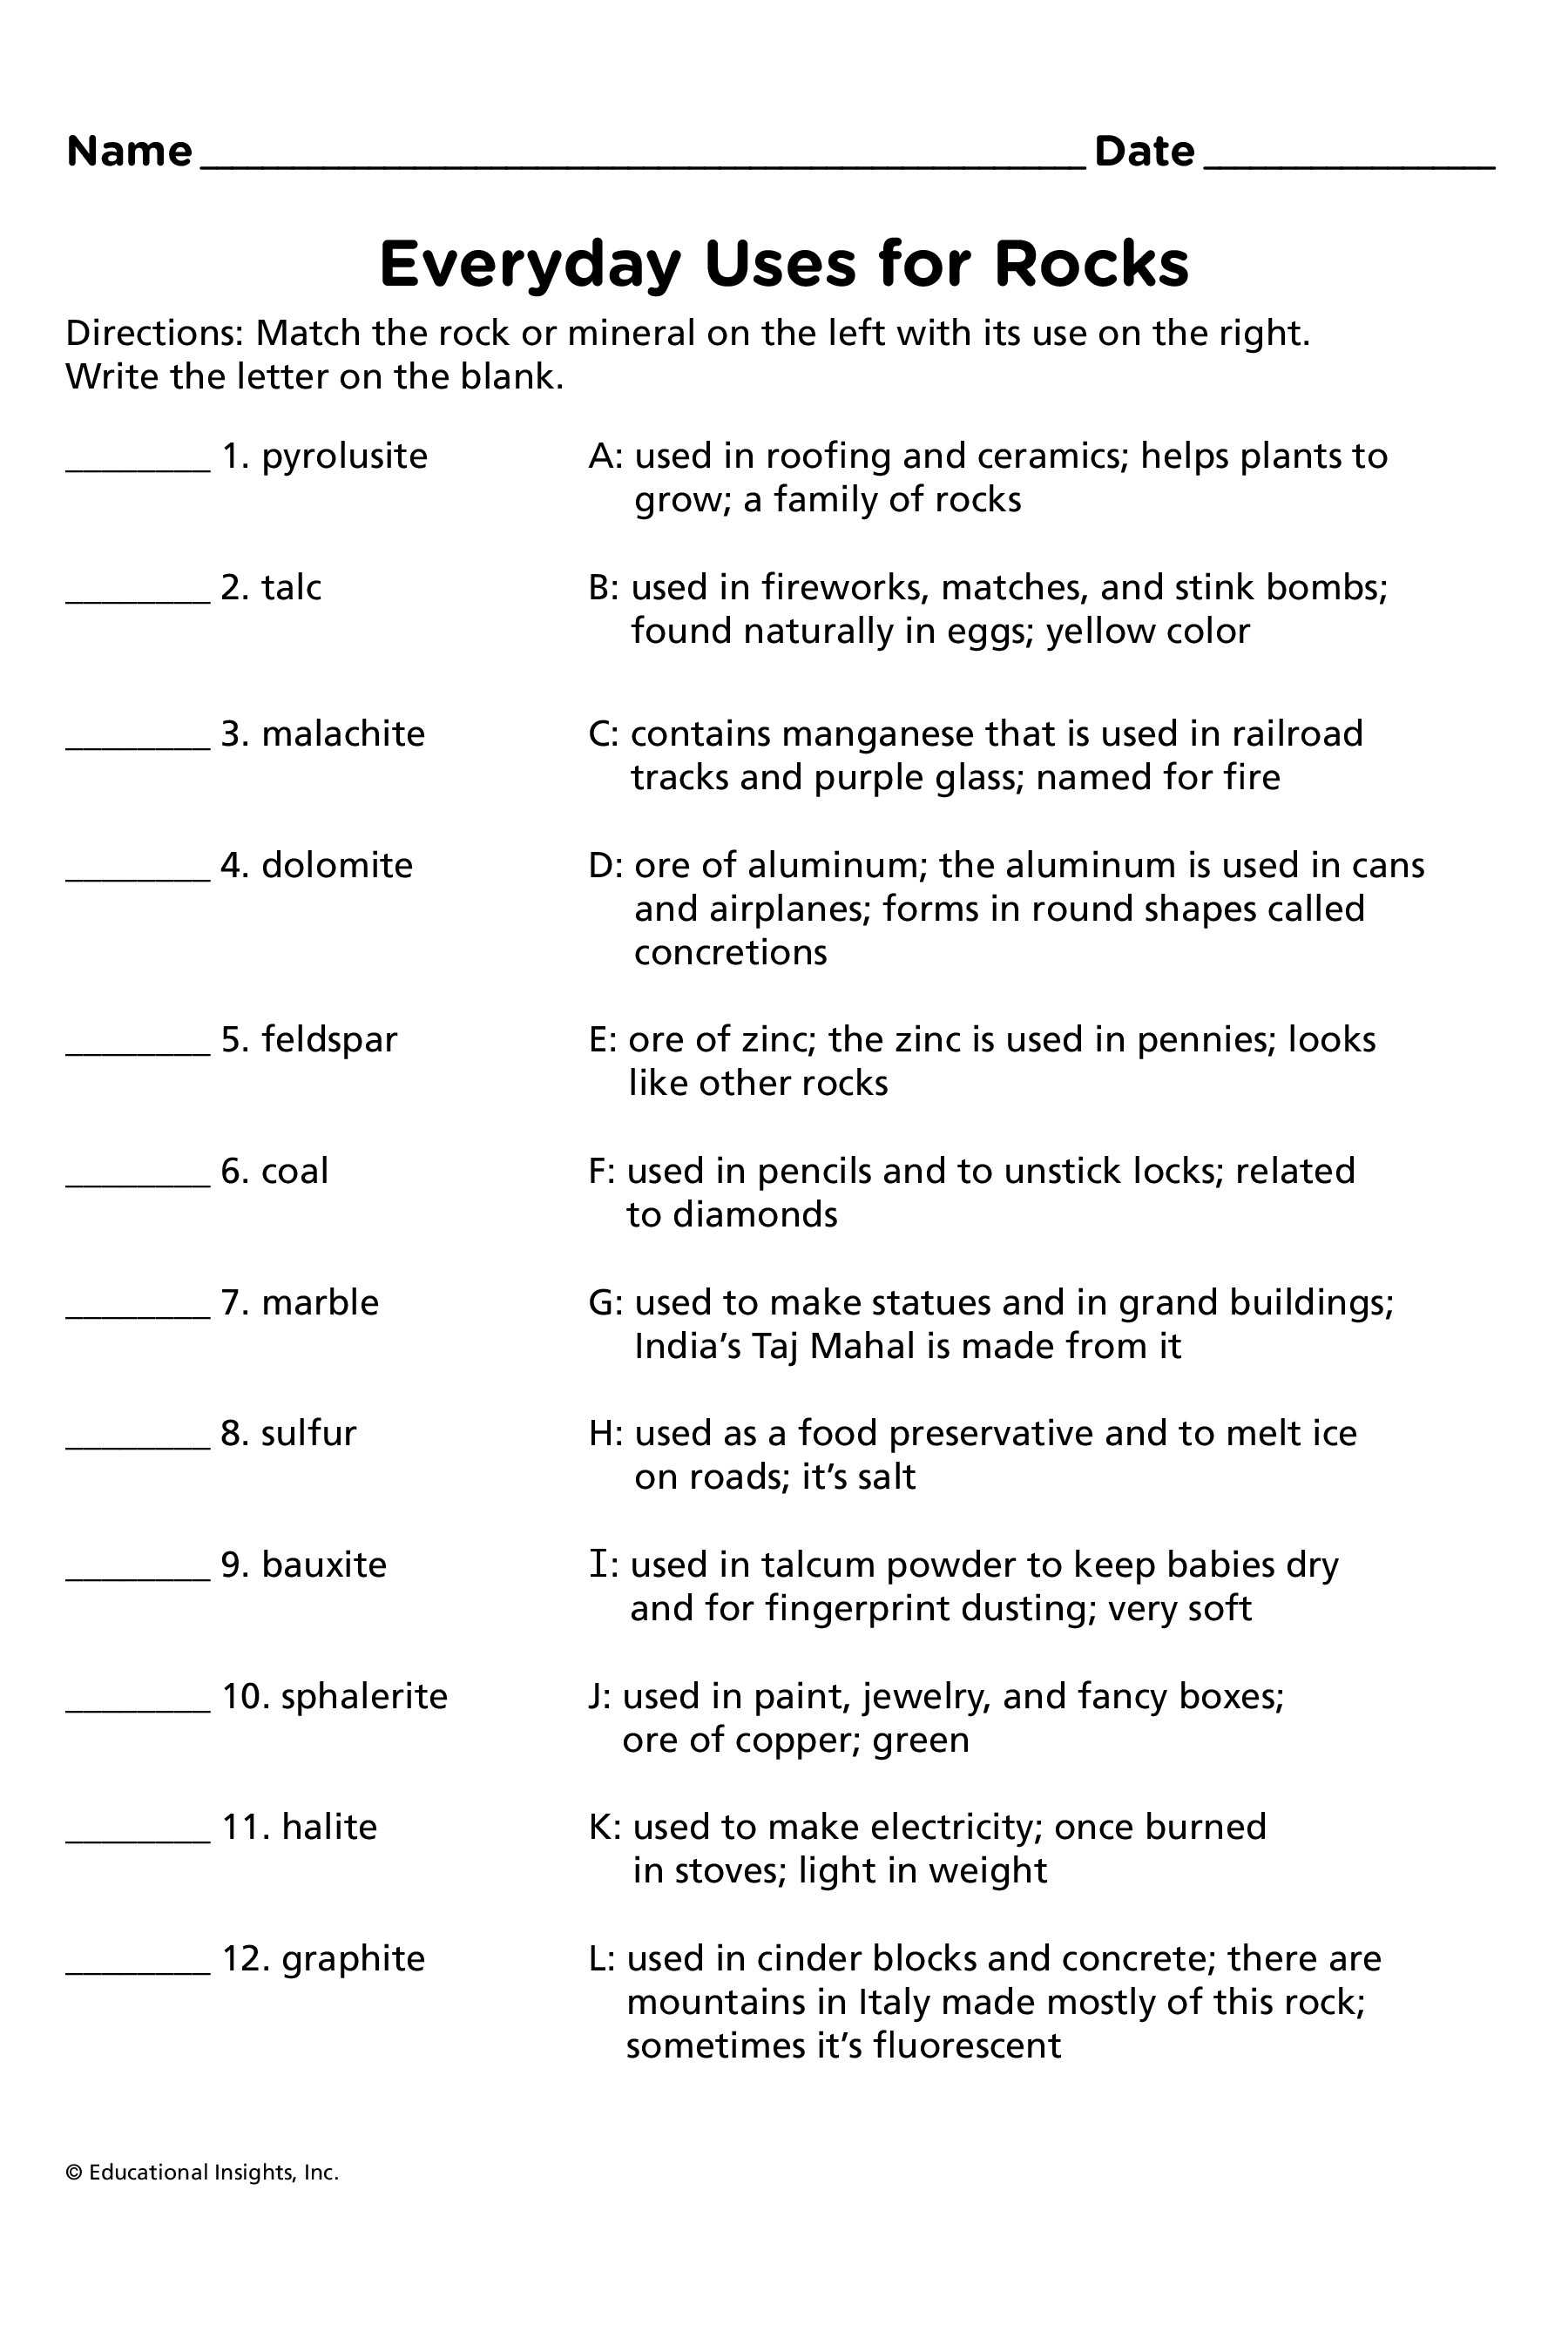 Speed and Velocity Worksheet Answer Key and Speed and Density Worksheet Tes Save Everyday Uses Rock & Card Set